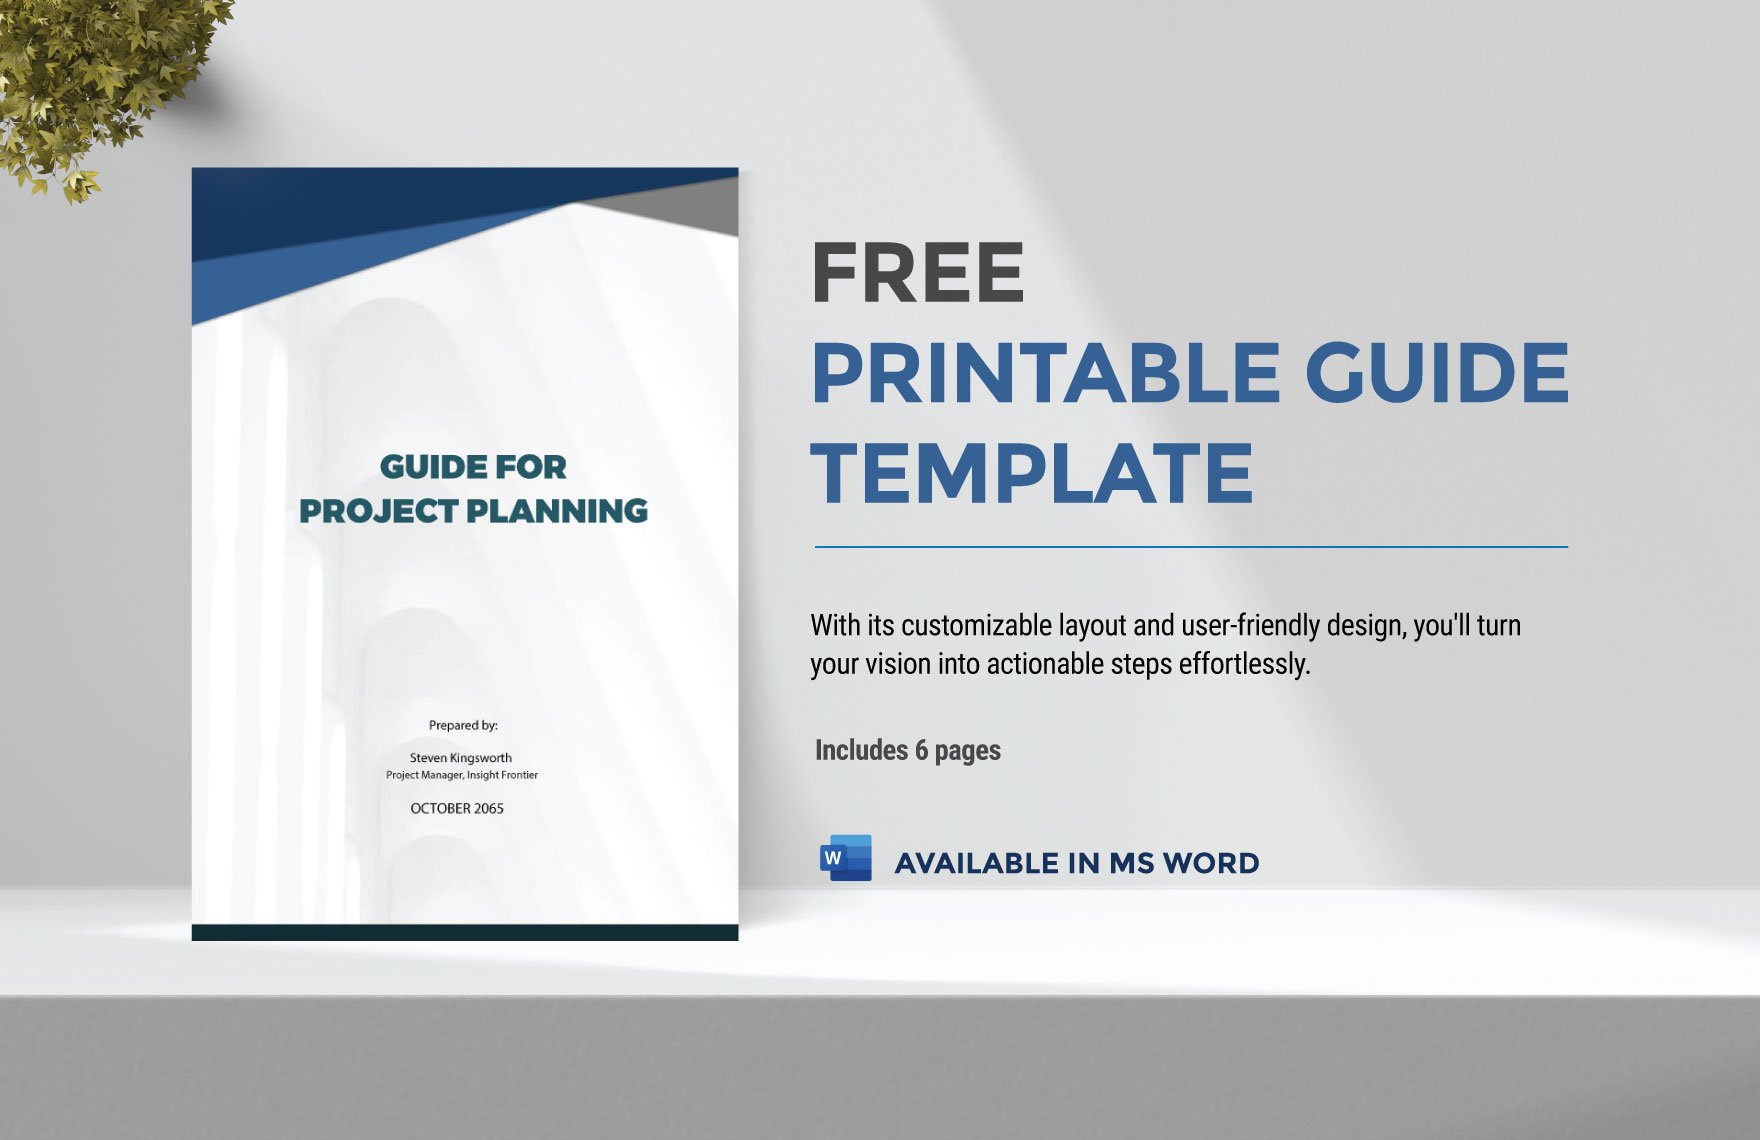 Free Printable Guide Template in Word